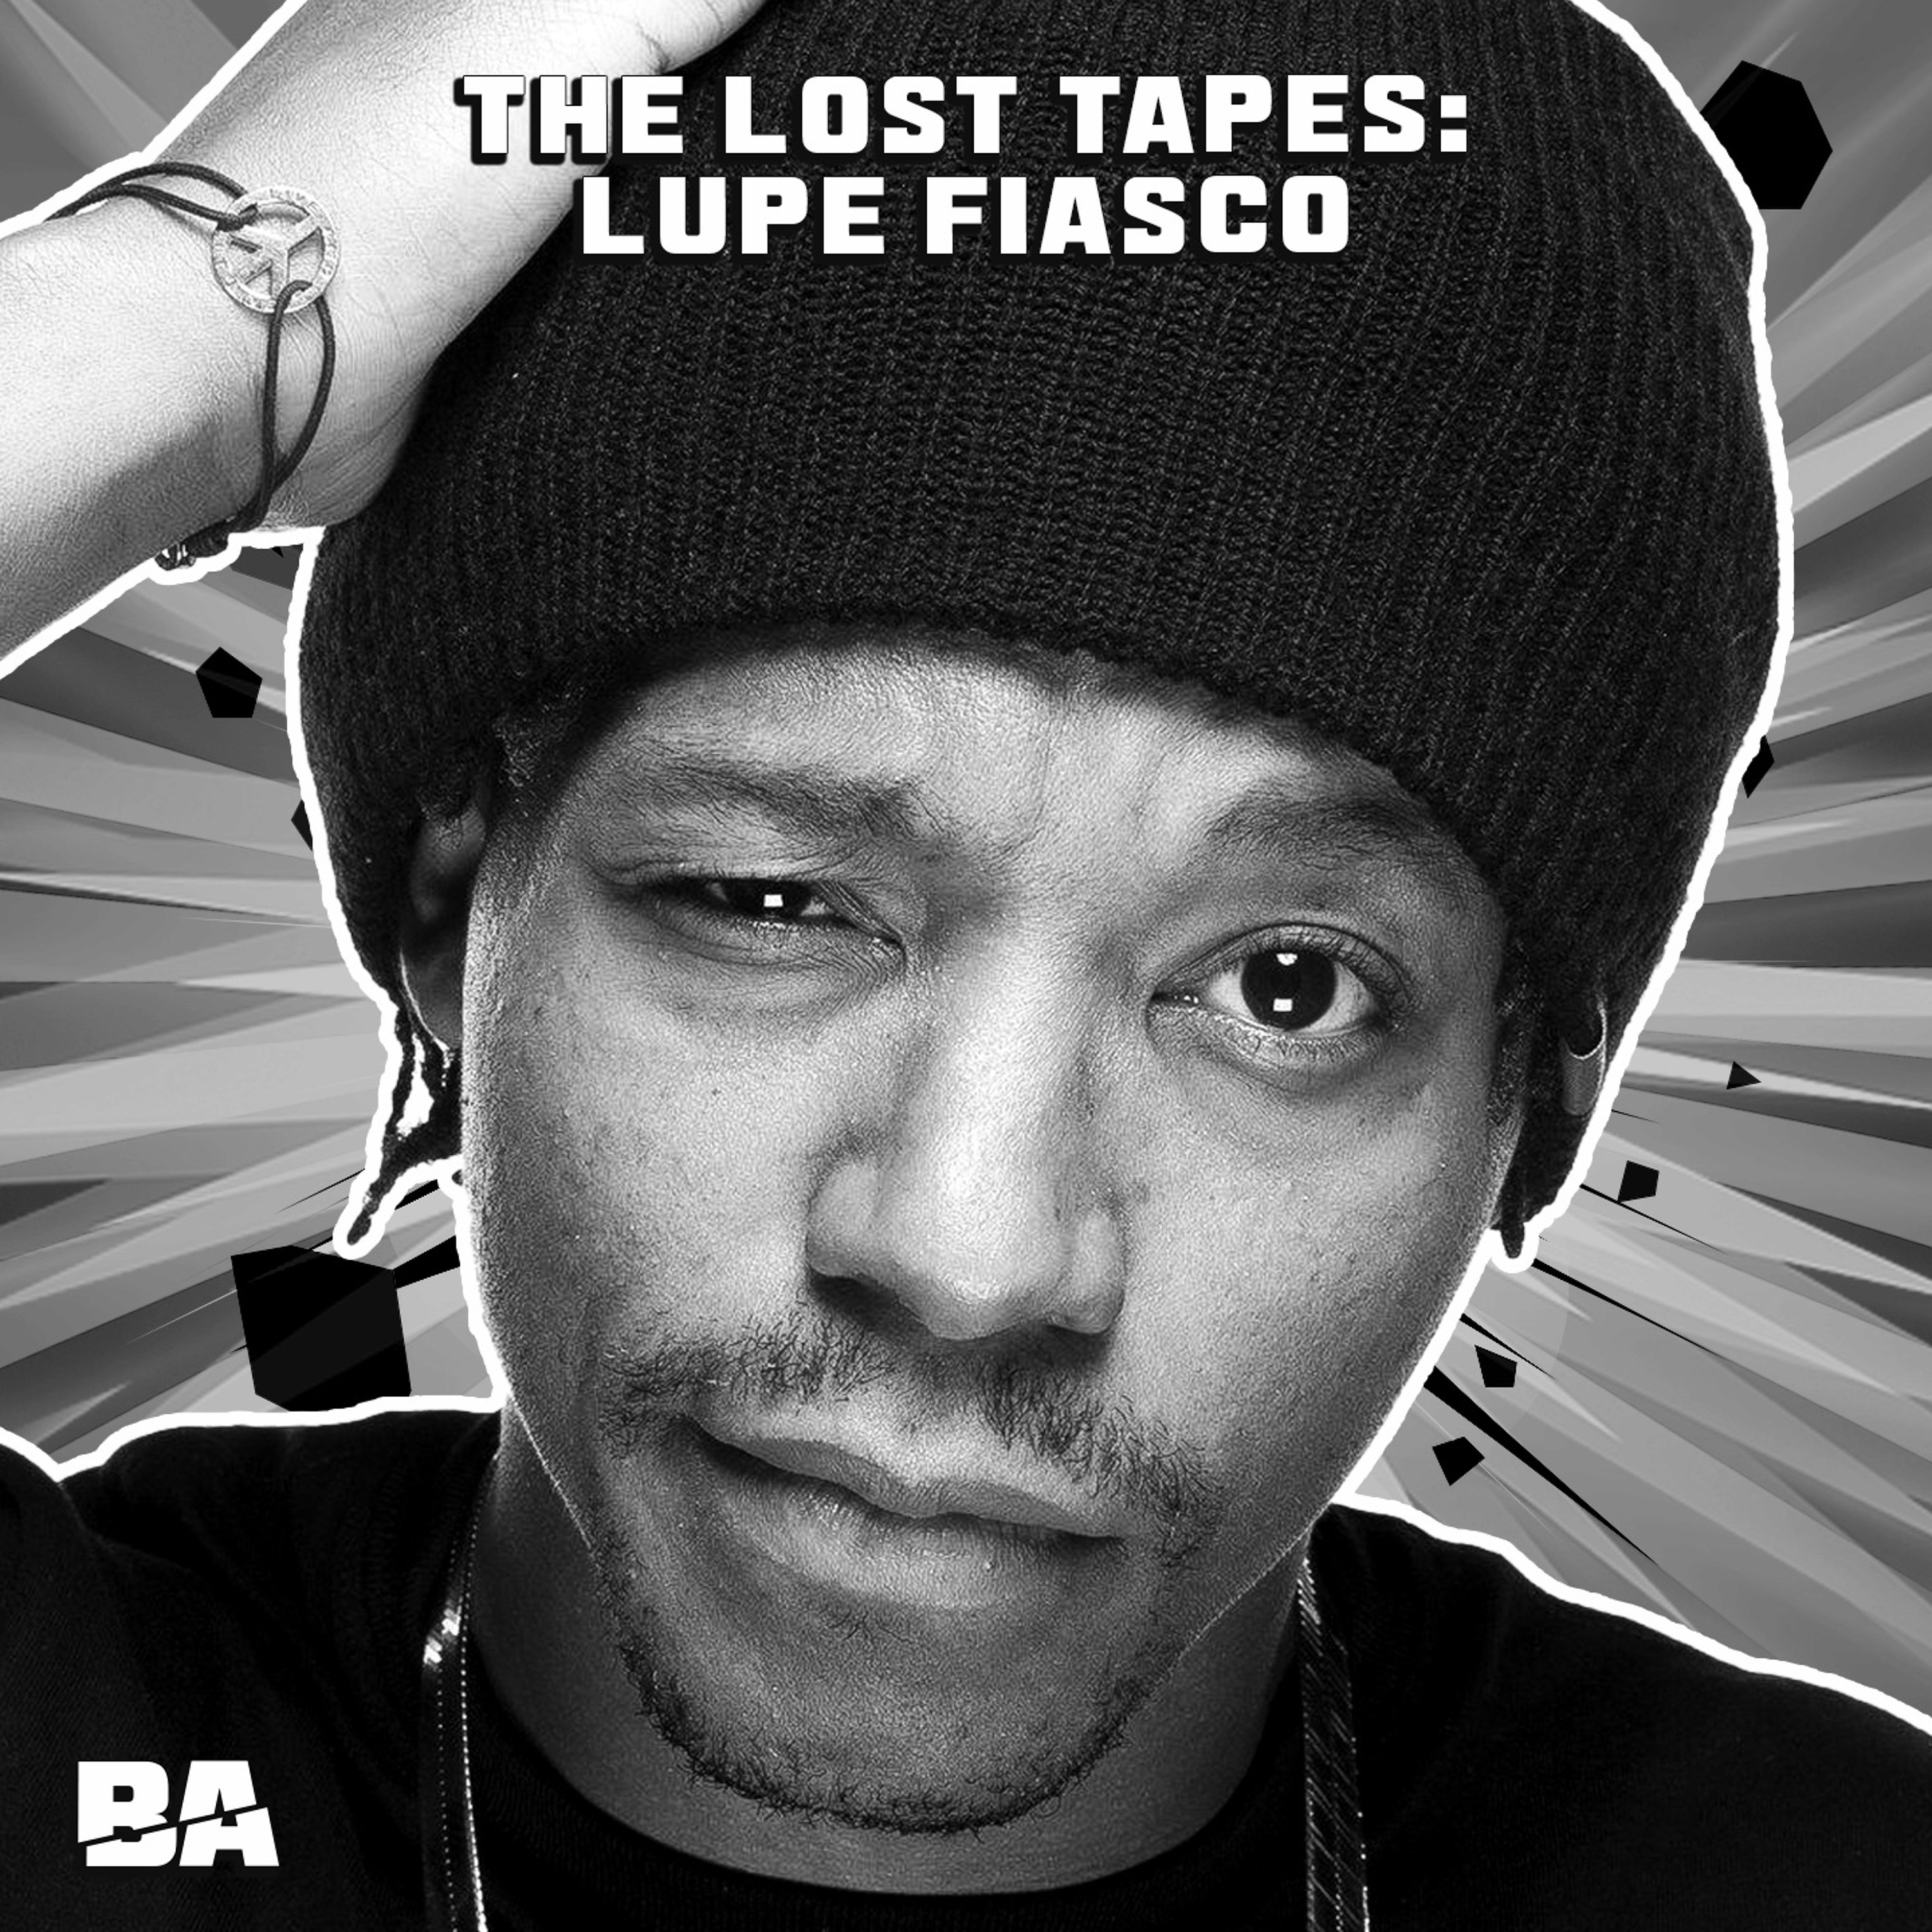 The Lost Tapes: Lupe Fiasco